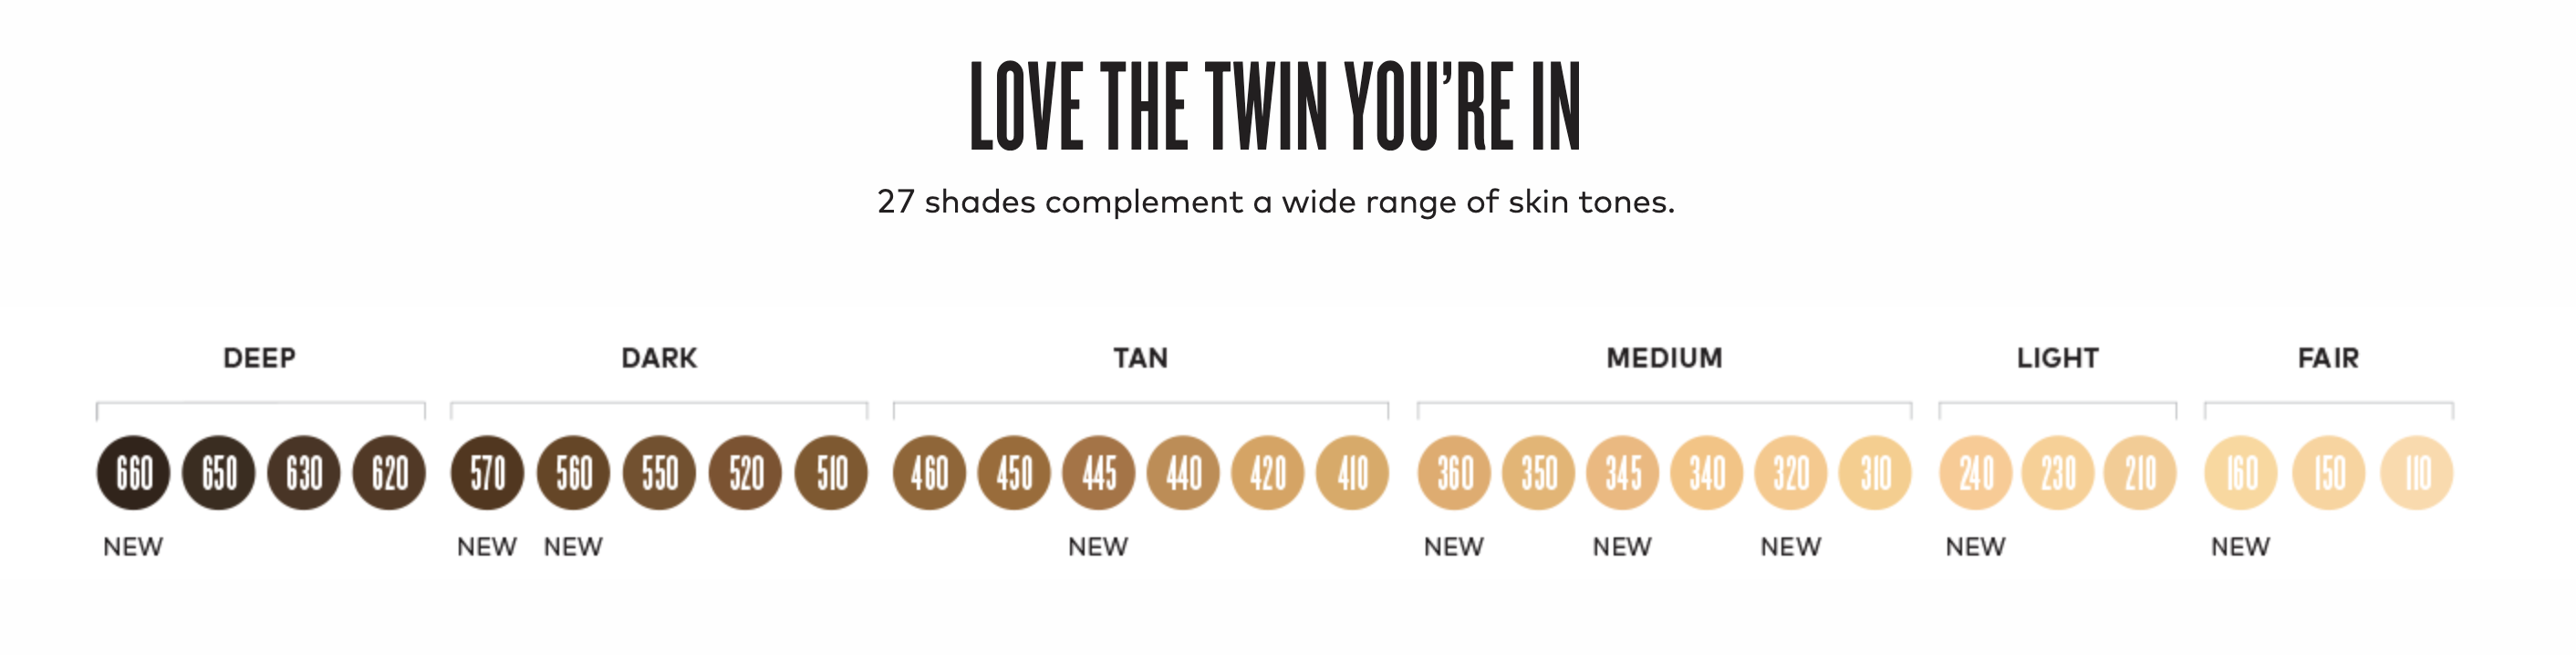 Beautycounter Skin Twin Colors and Shade Finder